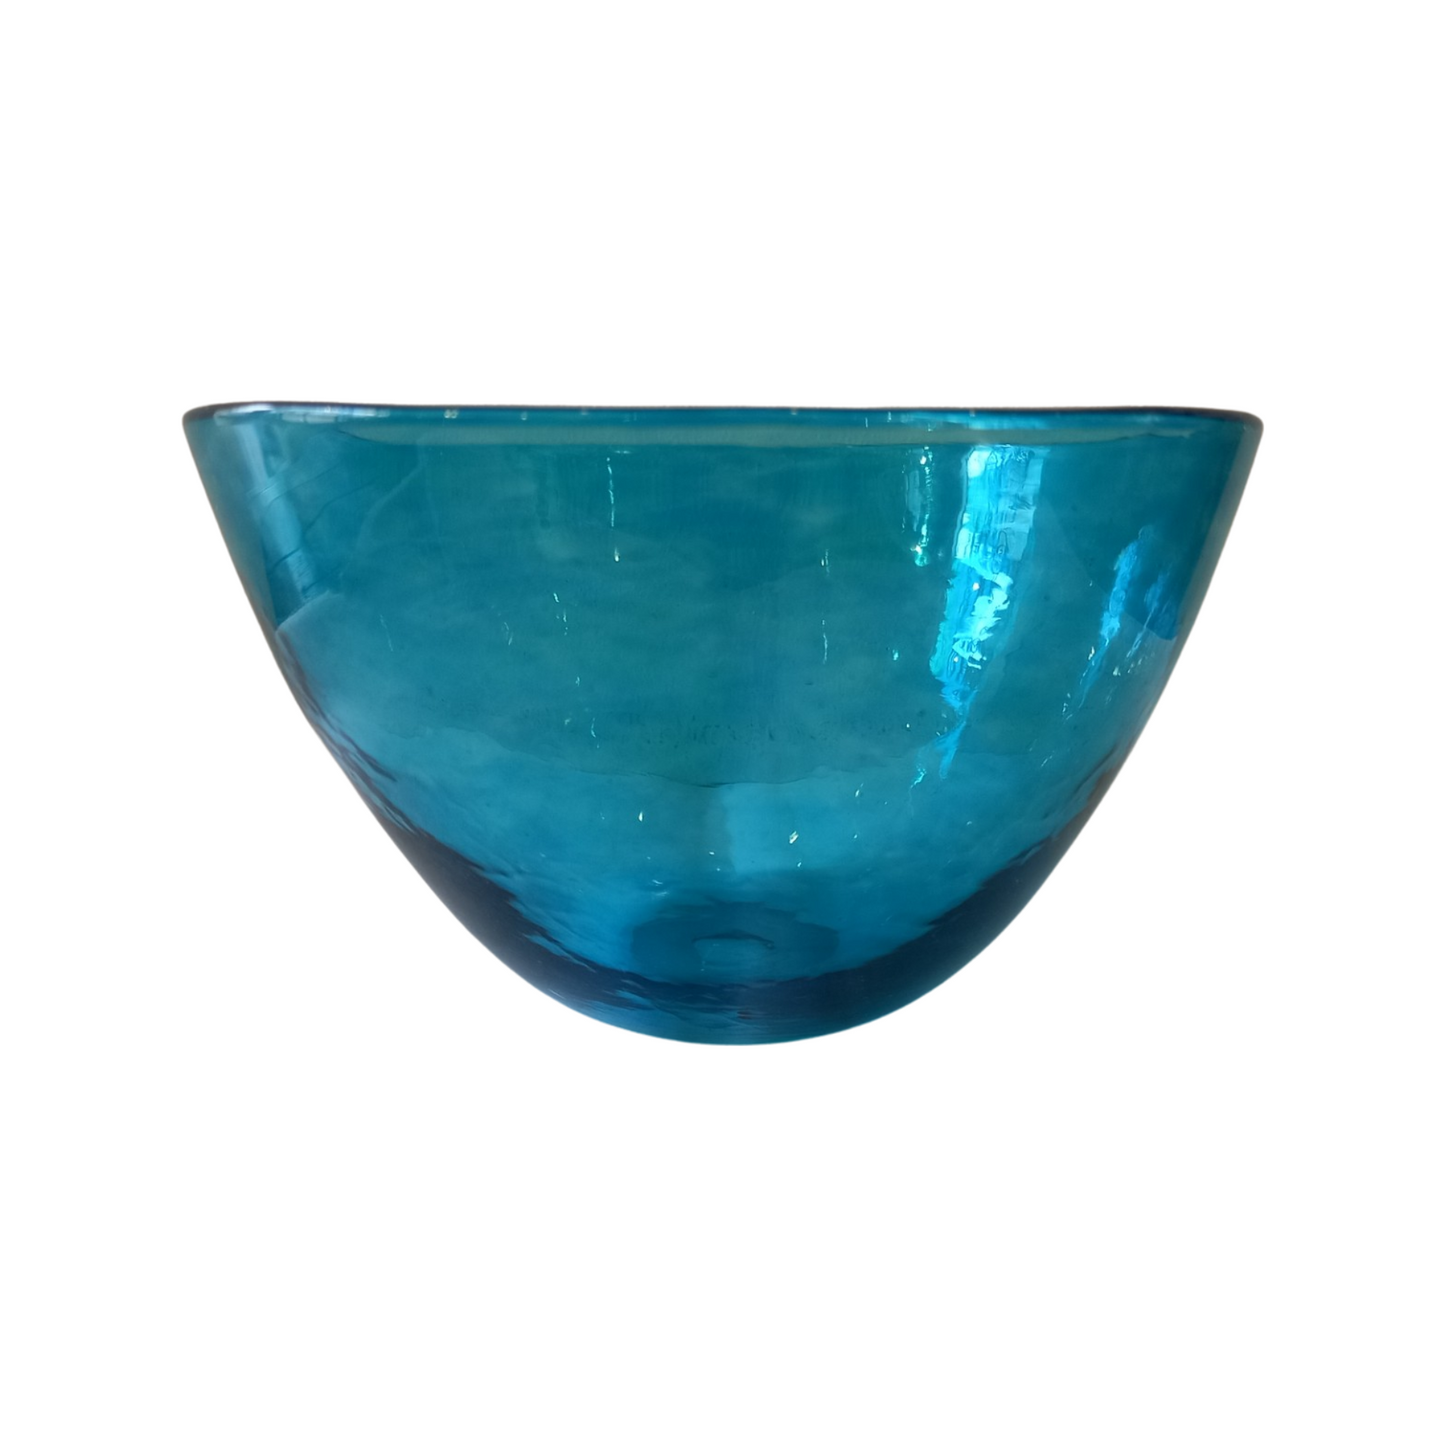 Cereal bowl in blue